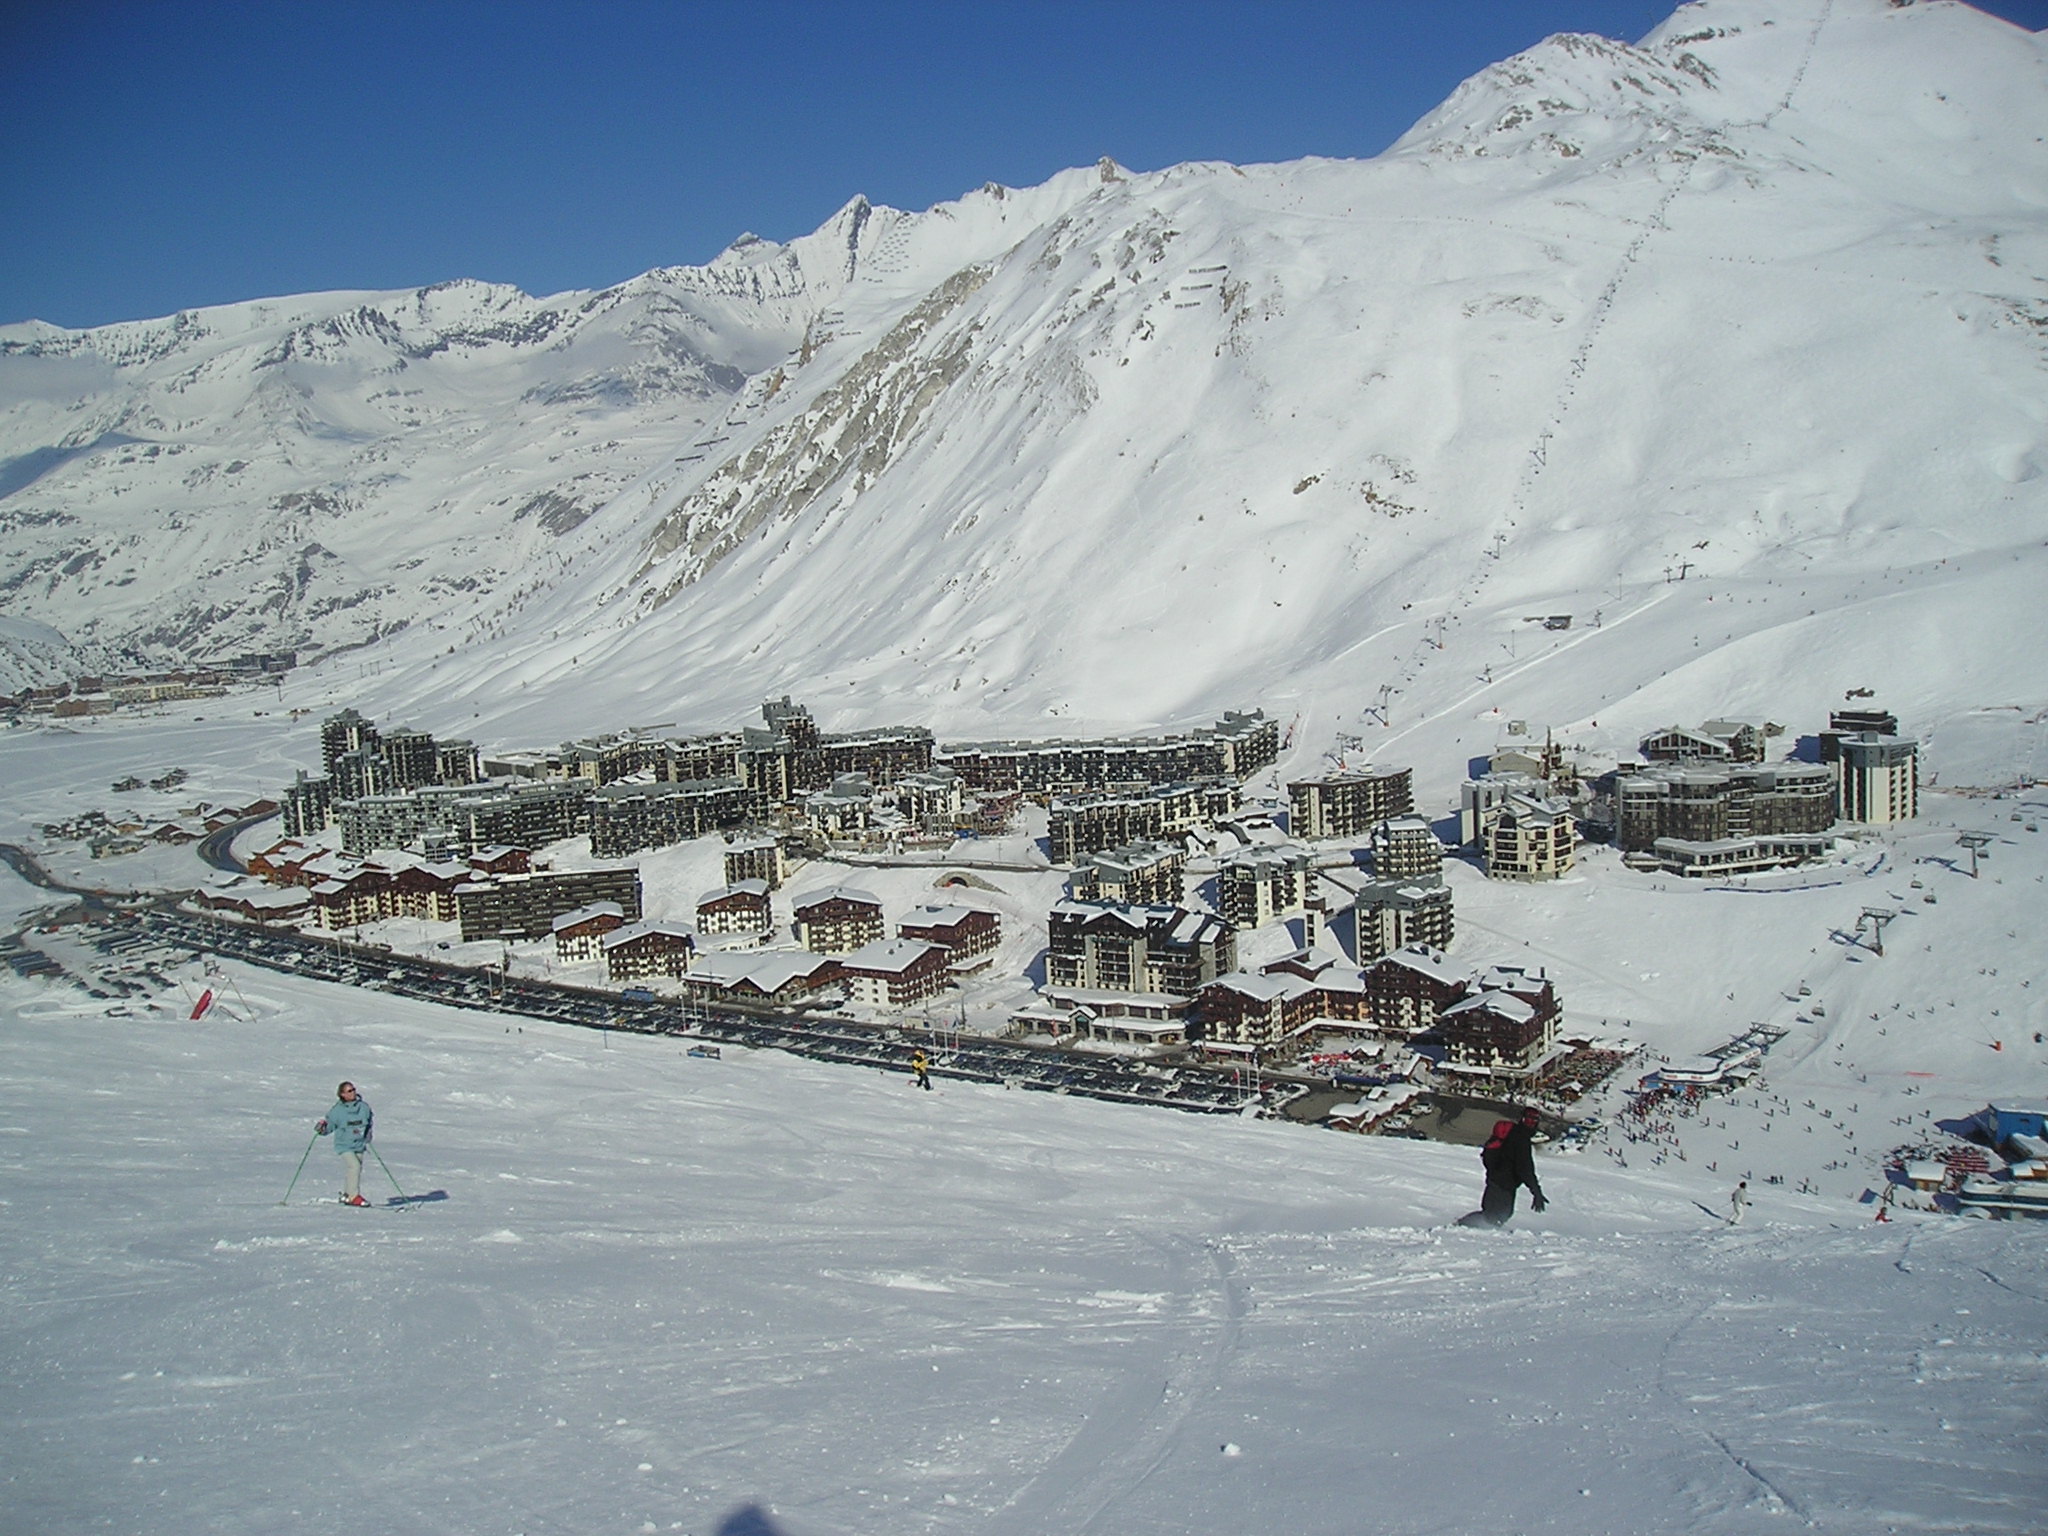 Tignes in its splendour, a very popular resort for British skiers. 